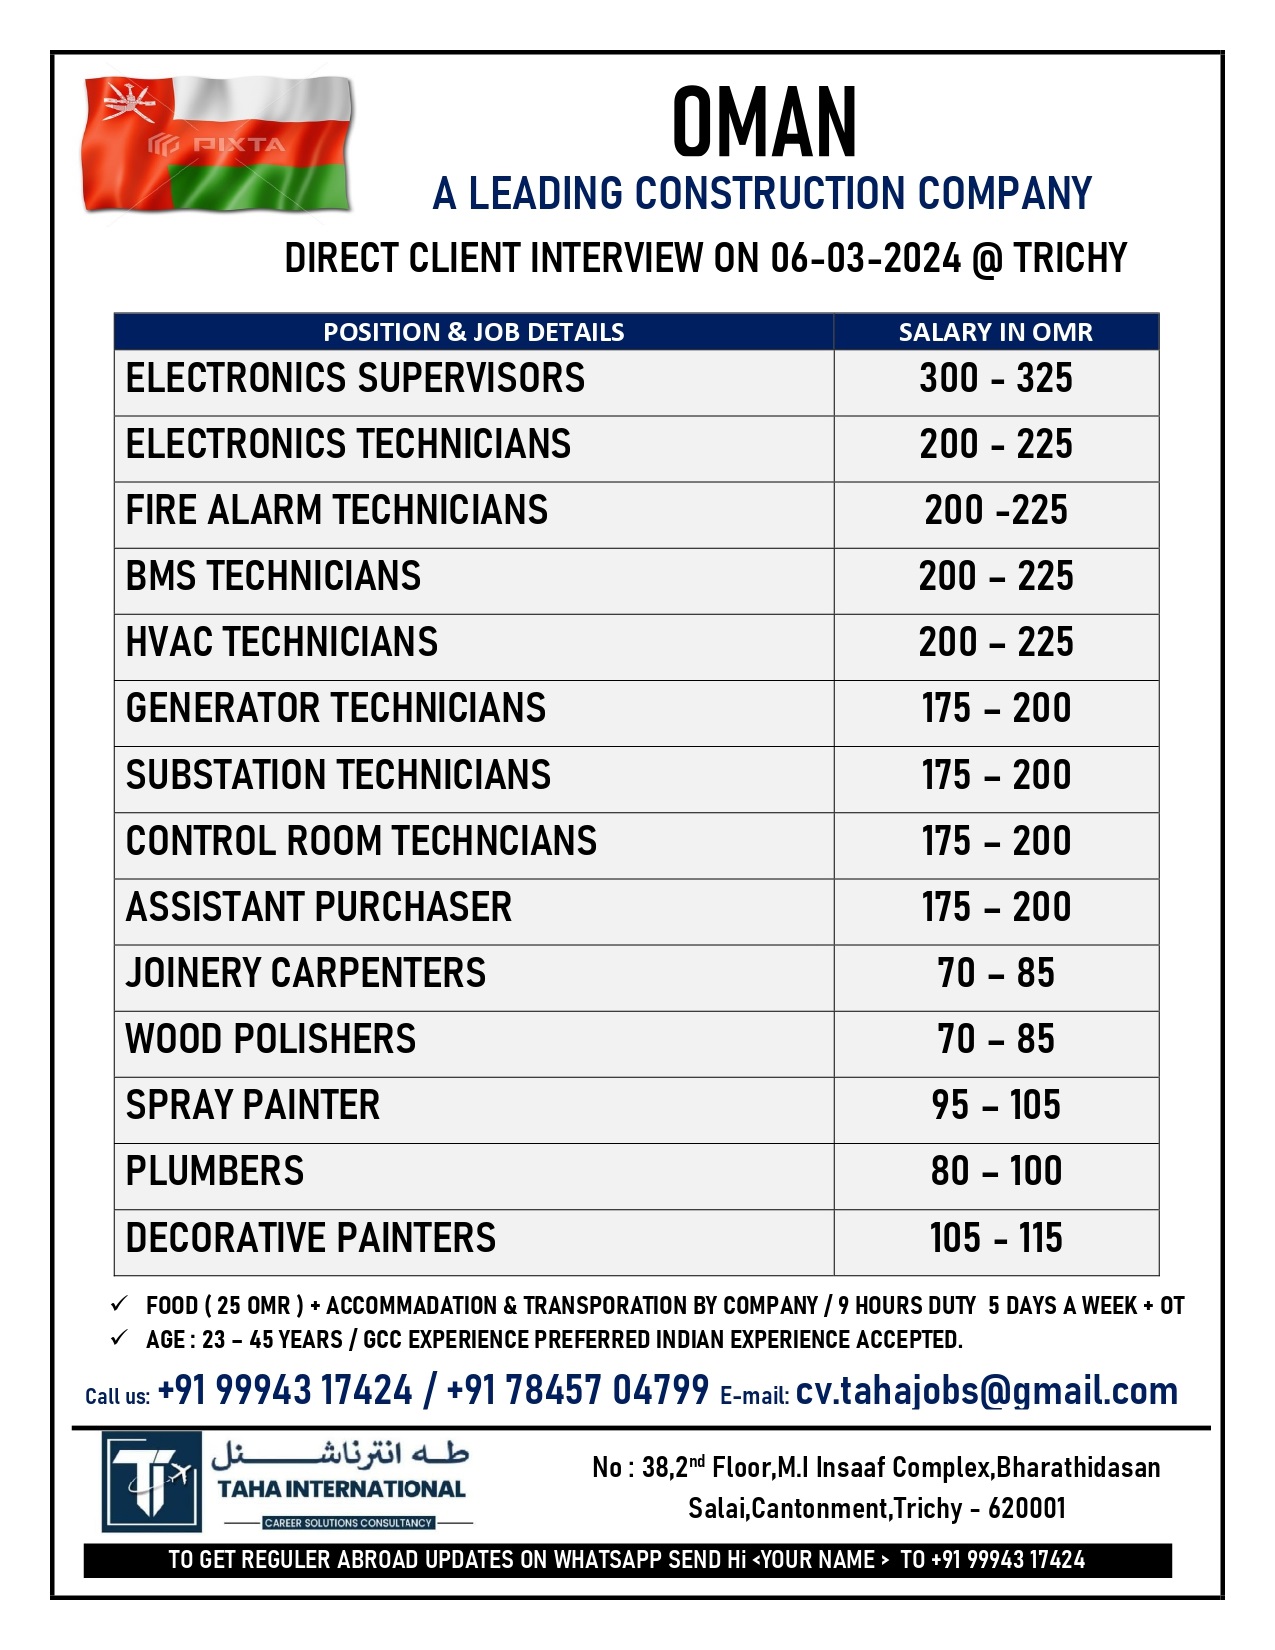 A LEADING CONSTRUCTION COMPANY IN OMAN – CLIENT INTERVIEW ON 06-03-2024 @ TRICHY